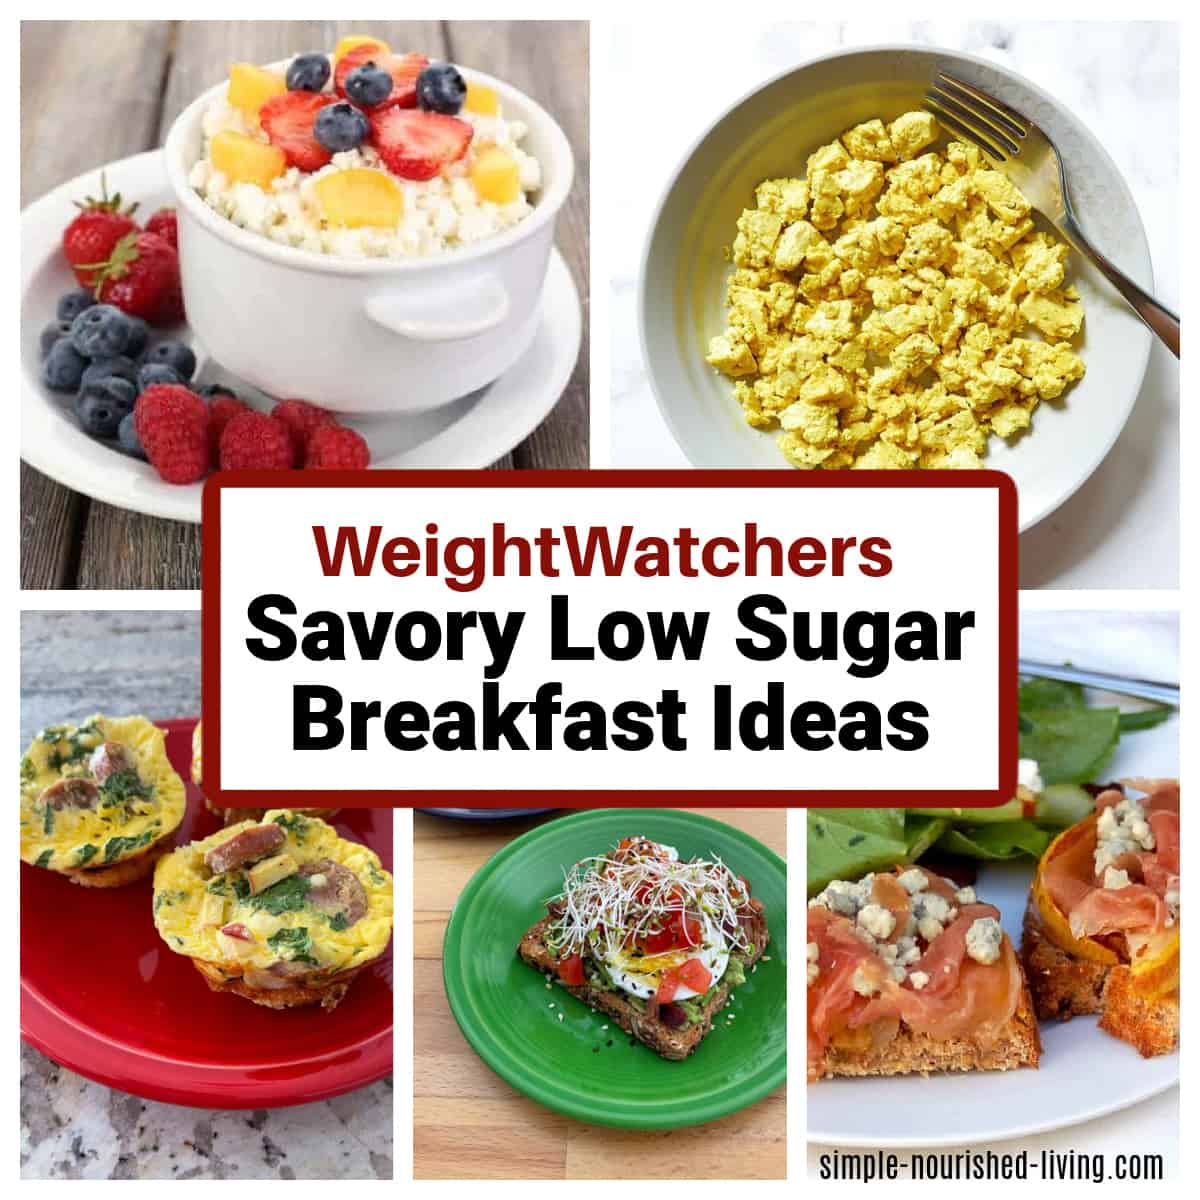 Photo Collage of Savory Low Sugar Breakfast Ideas for WW